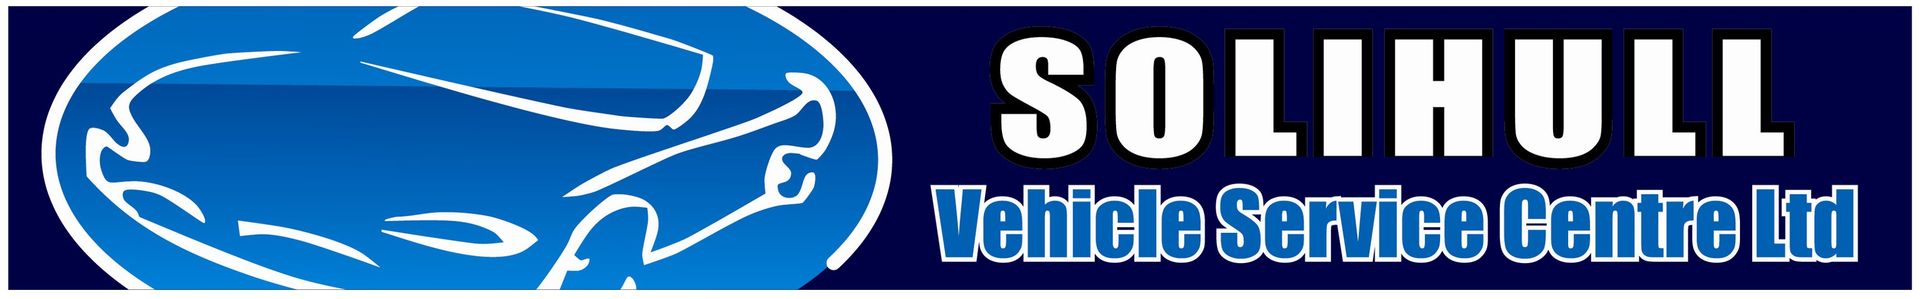 Solihull Vehicle Service Centre logo